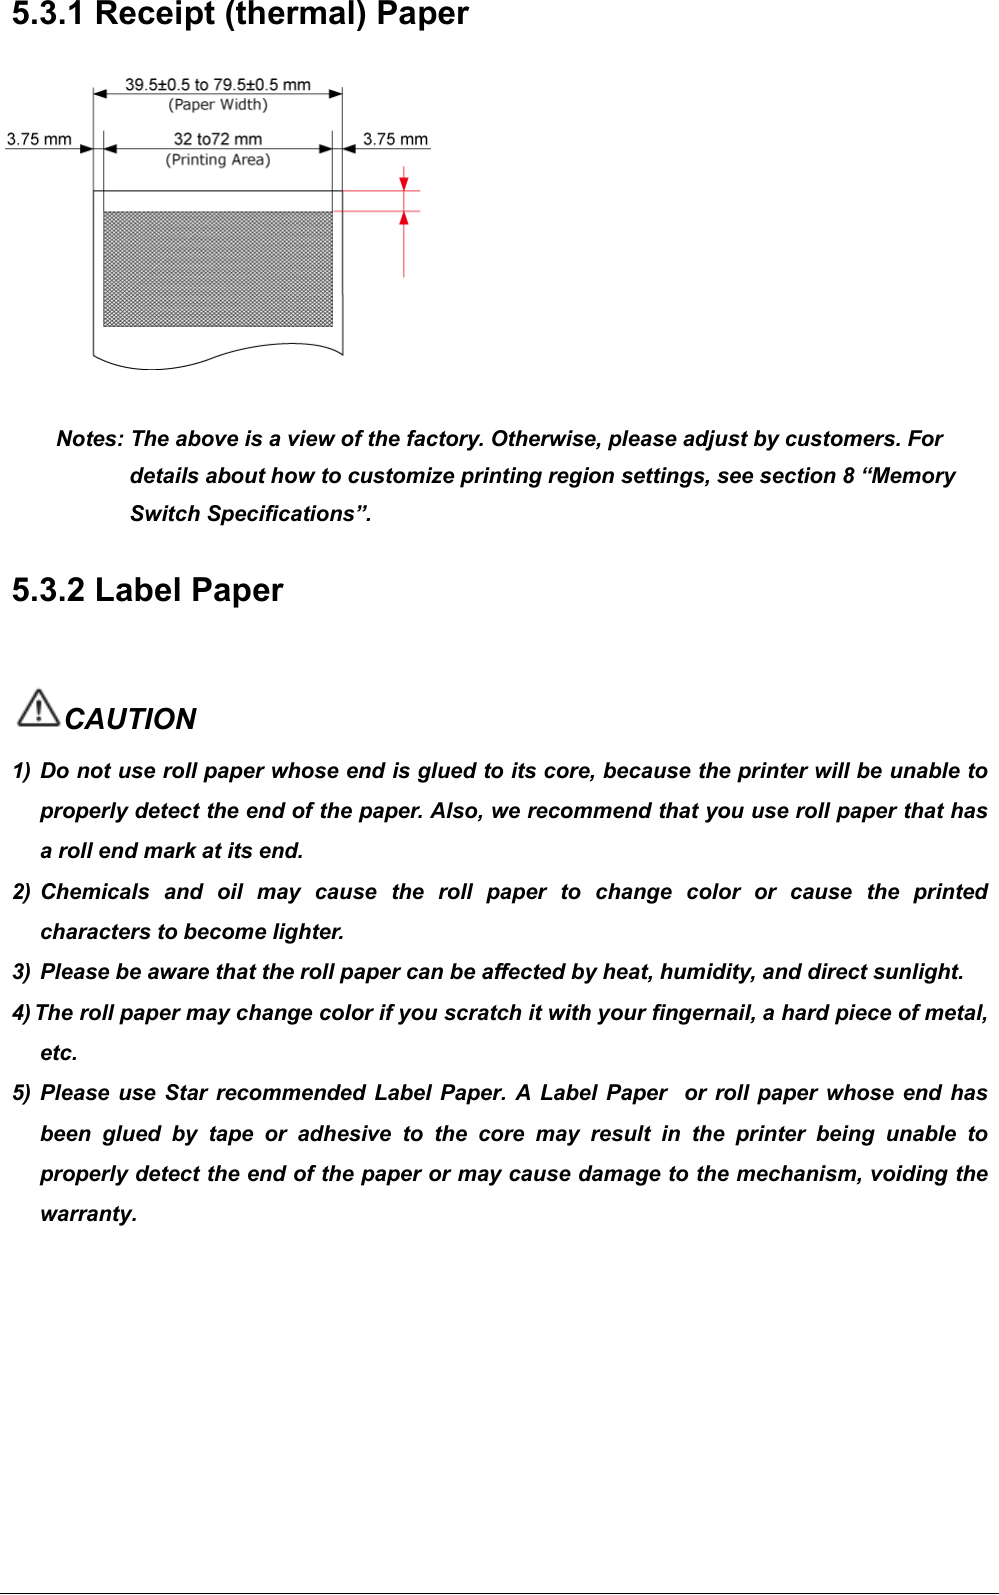   5.3.1 Receipt (thermal) Paper            Notes: The above is a view of the factory. Otherwise, please adjust by customers. For details about how to customize printing region settings, see section 8 “Memory Switch Specifications”.     5.3.2 Label Paper    CAUTION 1)  Do not use roll paper whose end is glued to its core, because the printer will be unable to properly detect the end of the paper. Also, we recommend that you use roll paper that has a roll end mark at its end. 2) Chemicals  and  oil  may  cause  the  roll  paper  to  change  color  or  cause  the  printed characters to become lighter. 3) Please be aware that the roll paper can be affected by heat, humidity, and direct sunlight. 4) The roll paper may change color if you scratch it with your fingernail, a hard piece of metal, etc. 5) Please  use  Star  recommended  Label Paper. A Label  Paper    or  roll paper  whose  end  has been  glued  by  tape  or  adhesive  to  the  core  may  result  in  the  printer  being  unable  to properly detect the end of the paper or may cause damage to the mechanism, voiding the warranty.         